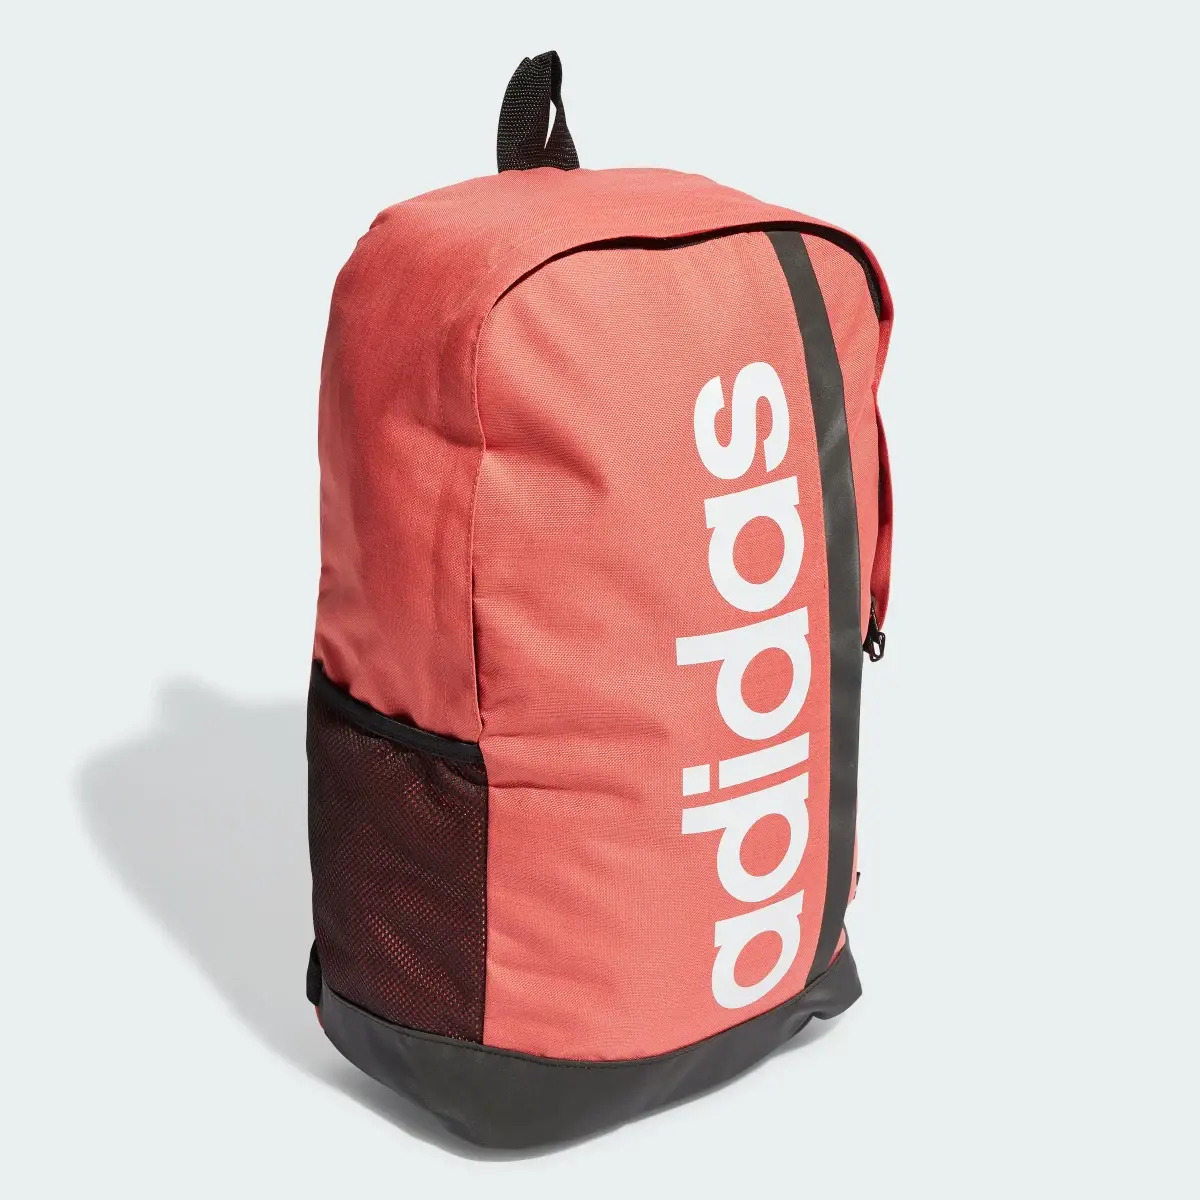 Adidas Essentials Linear Backpack. 2